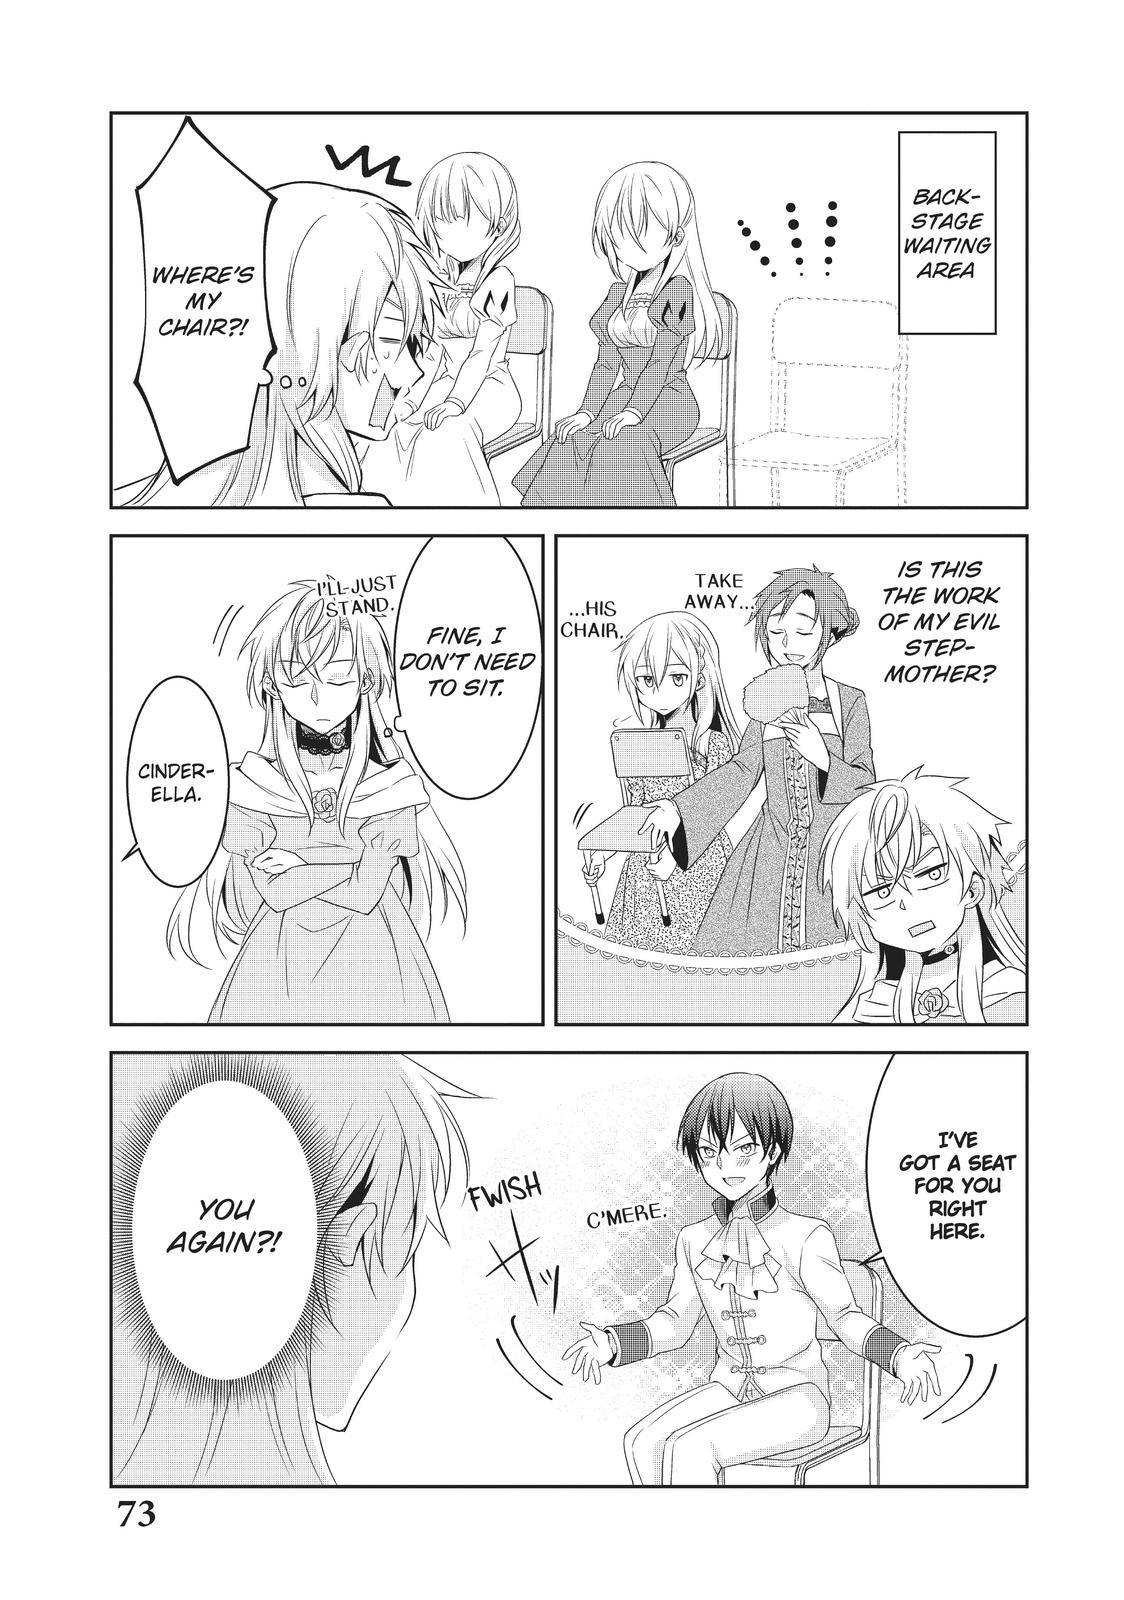 The Story Of The Girl I Like Being Too Ikemen - chapter 6 - #6